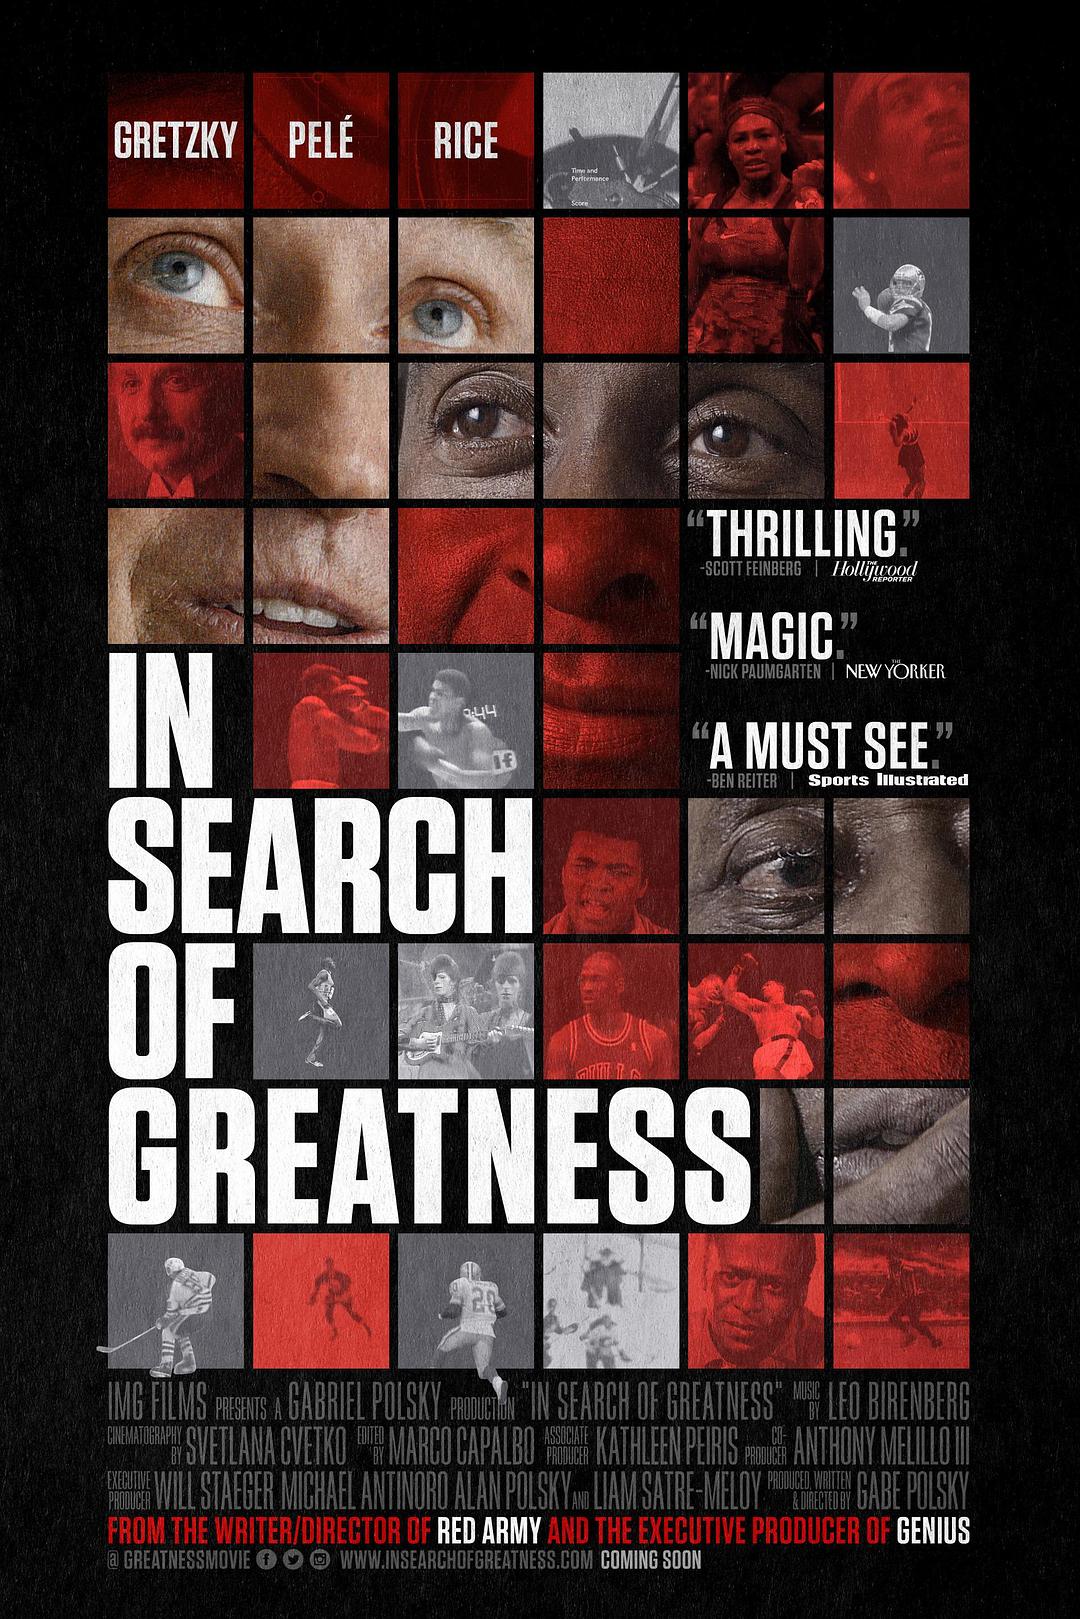 Ѱΰ In.Search.of.Greatness.2018.1080p.BluRay.REMUX.AVC.DTS-HD.MA.5.1-FGT 17.65G-1.png